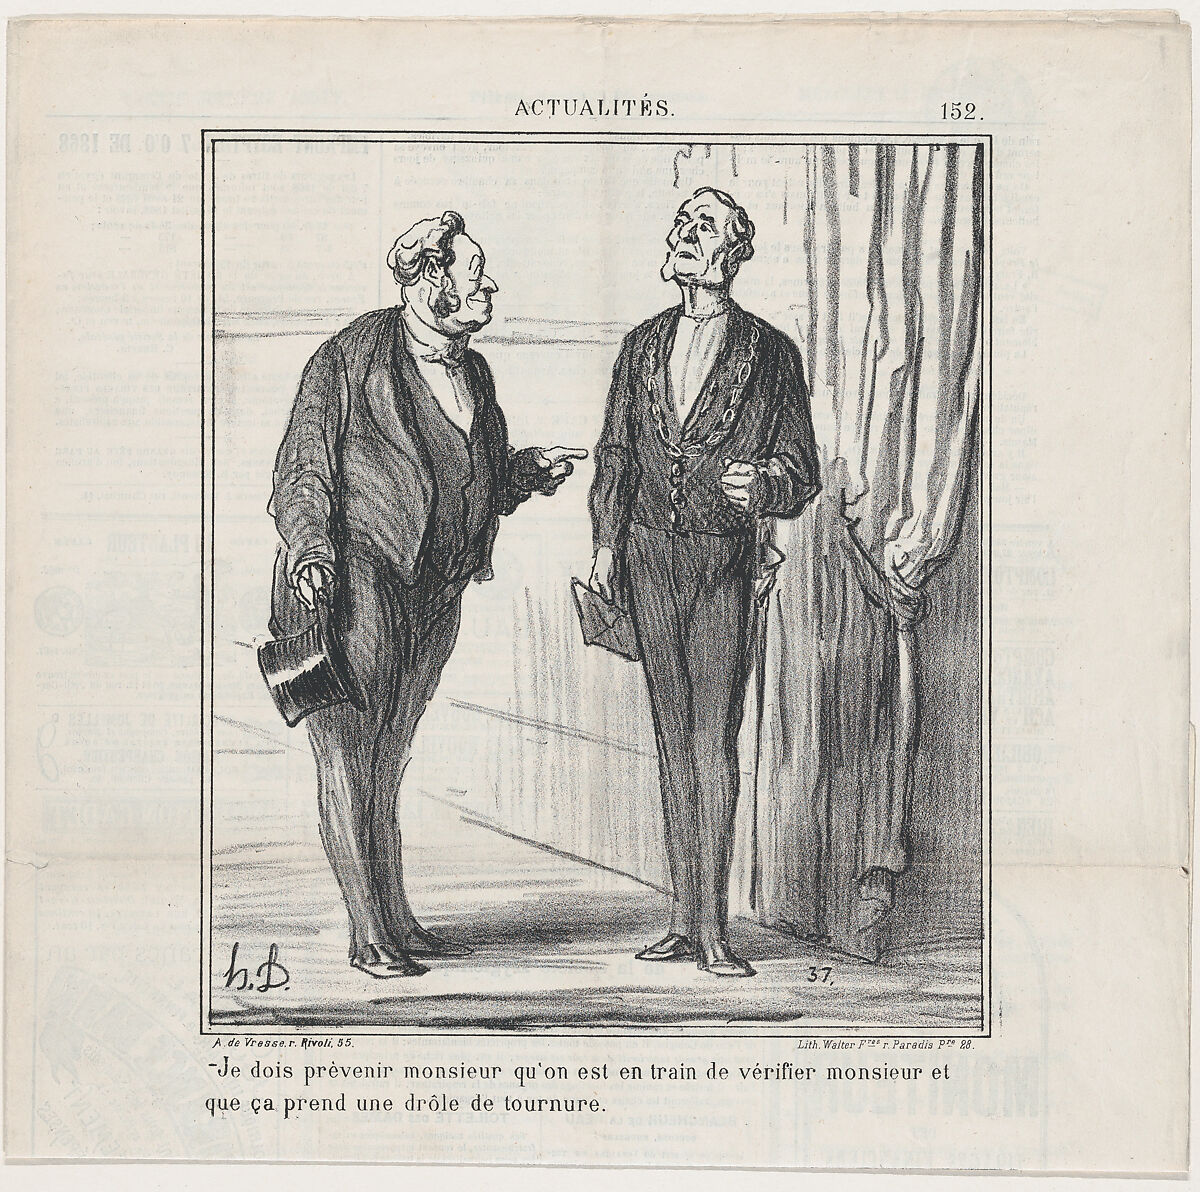 Monsieur, I am bound to advise you that they are in the process of verifying Monsieur and that this seems to be taking a curious turn, from "News of the day", Honoré Daumier (French, Marseilles 1808–1879 Valmondois), Lithograph on newsprint; third state of three (Delteil) 